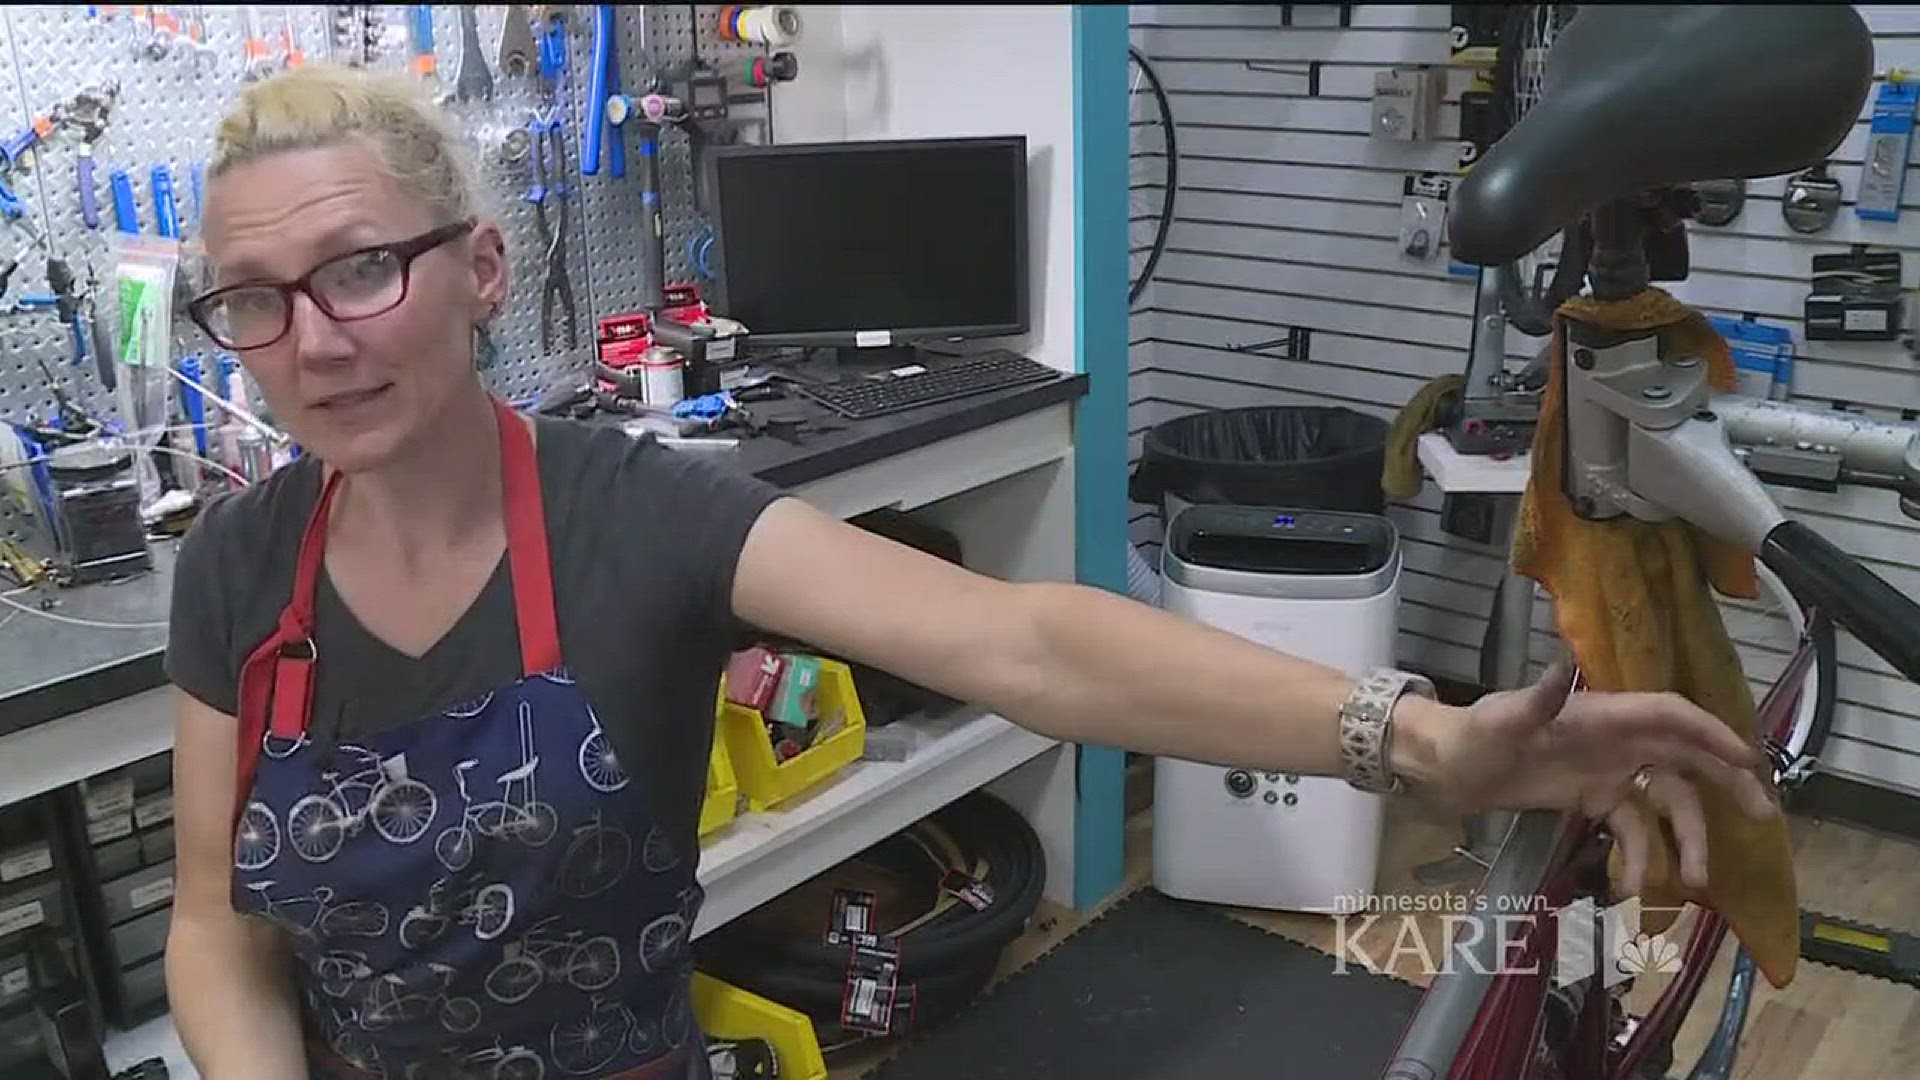 A St. Paul woman turned her love of cycling into owning her own bike shop.